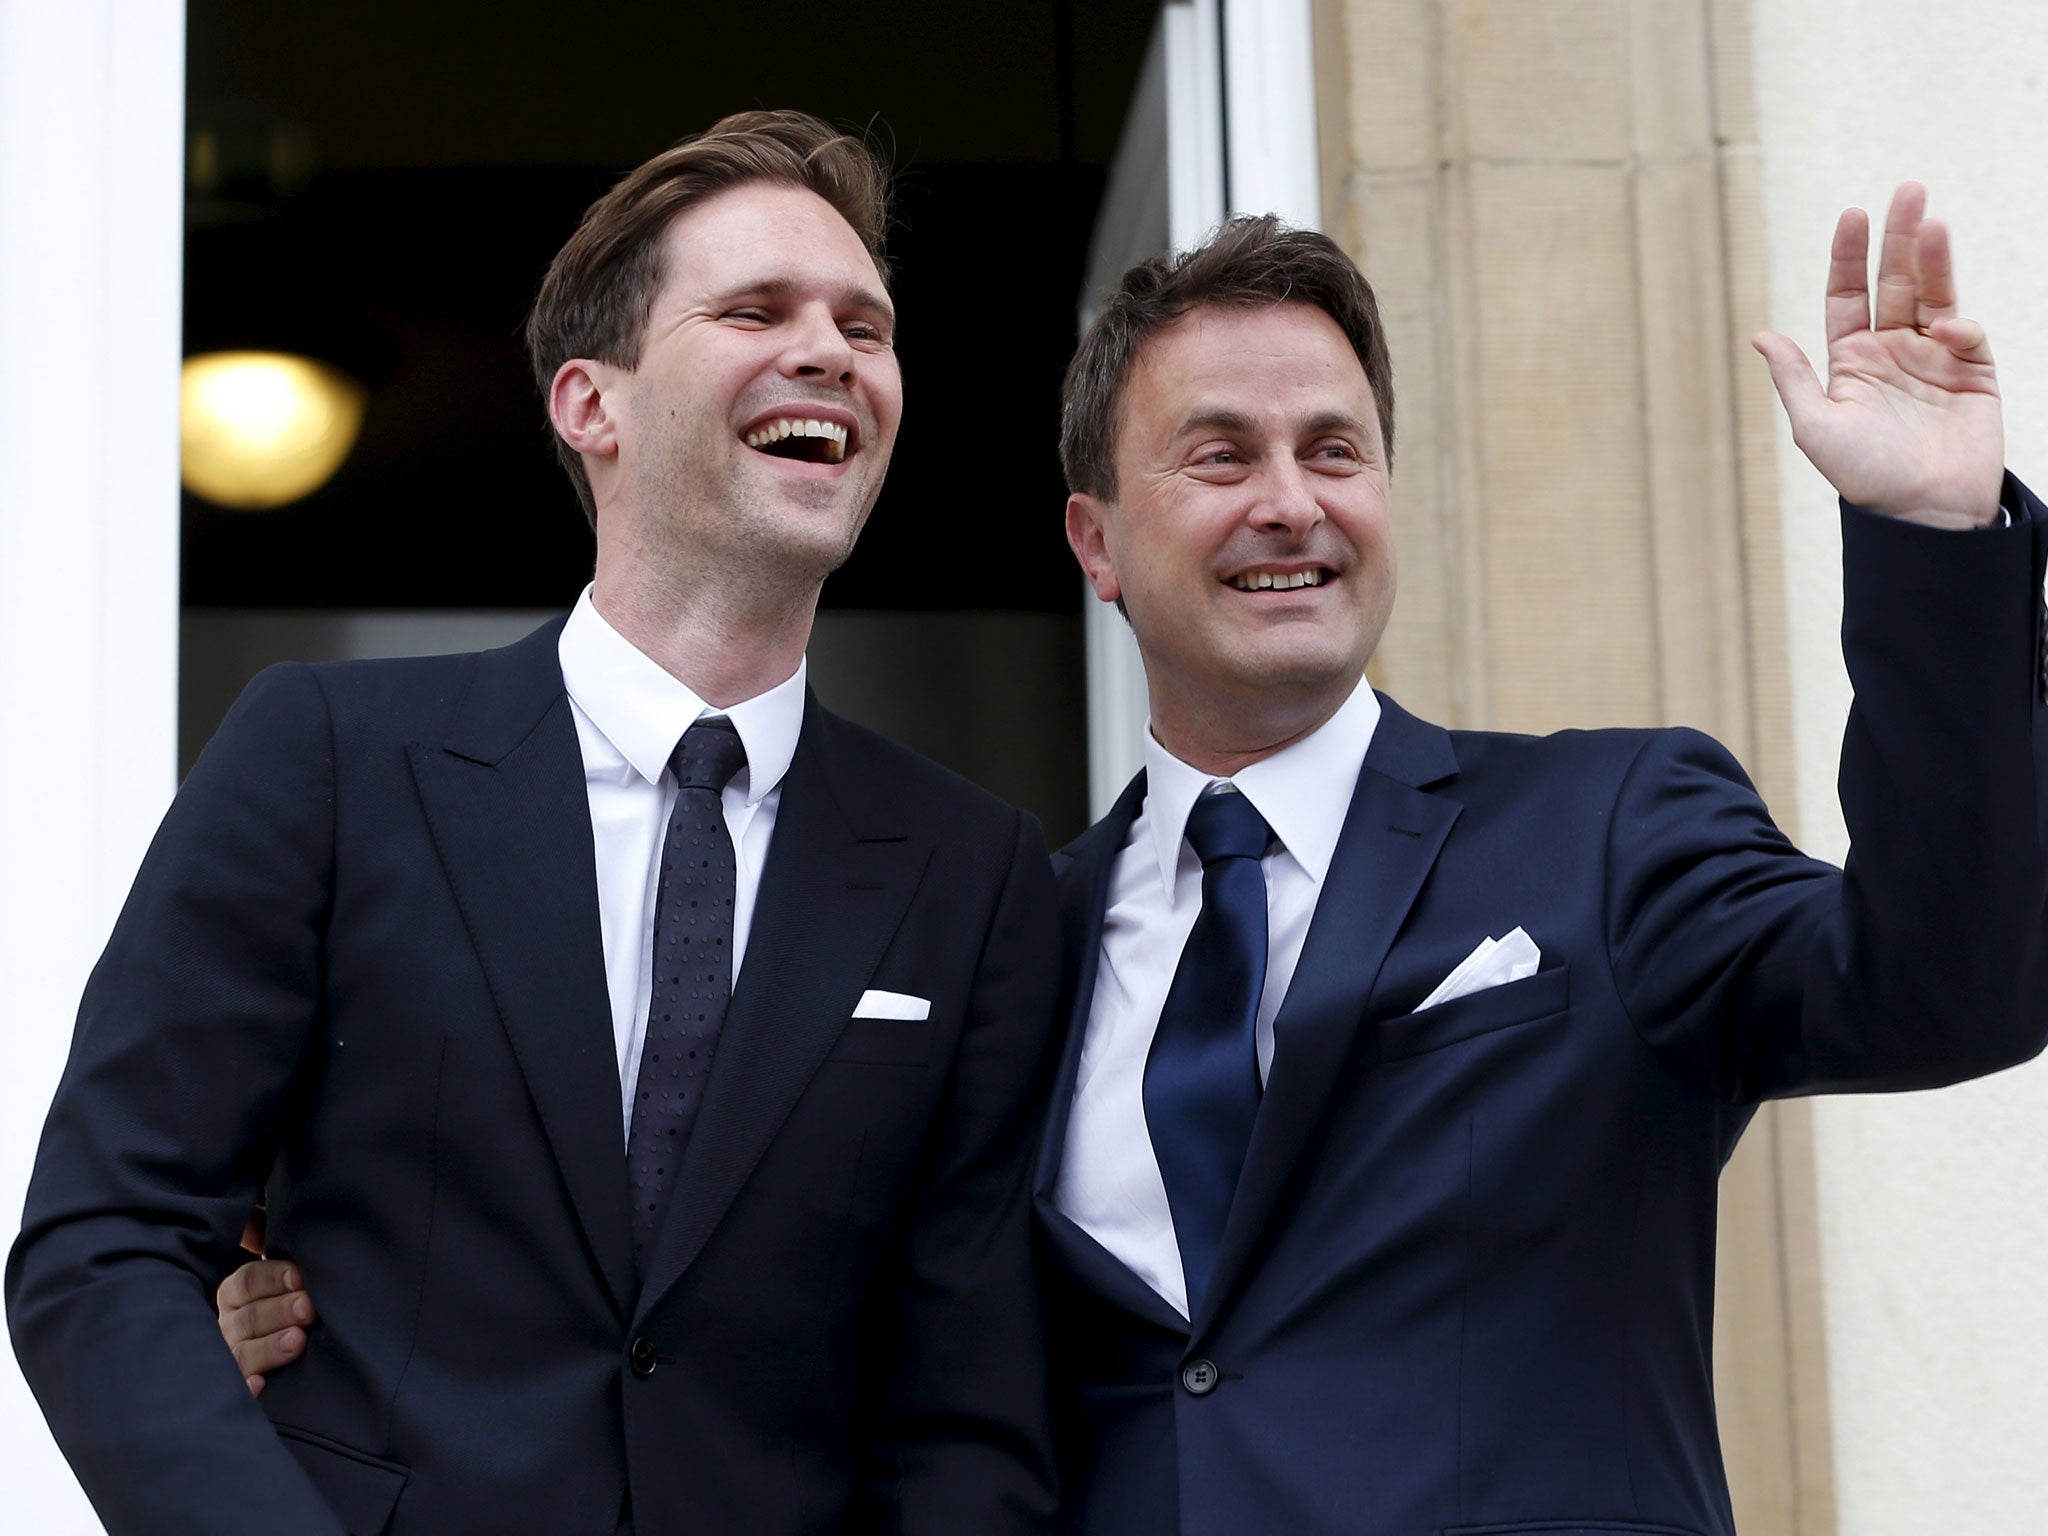 Luxembourg's Prime Minister Xavier Bettel waves as he poses with his partner Gauthier Destenay (L), after their wedding ceremony at Luxembourg's city hall, May 15, 2015.